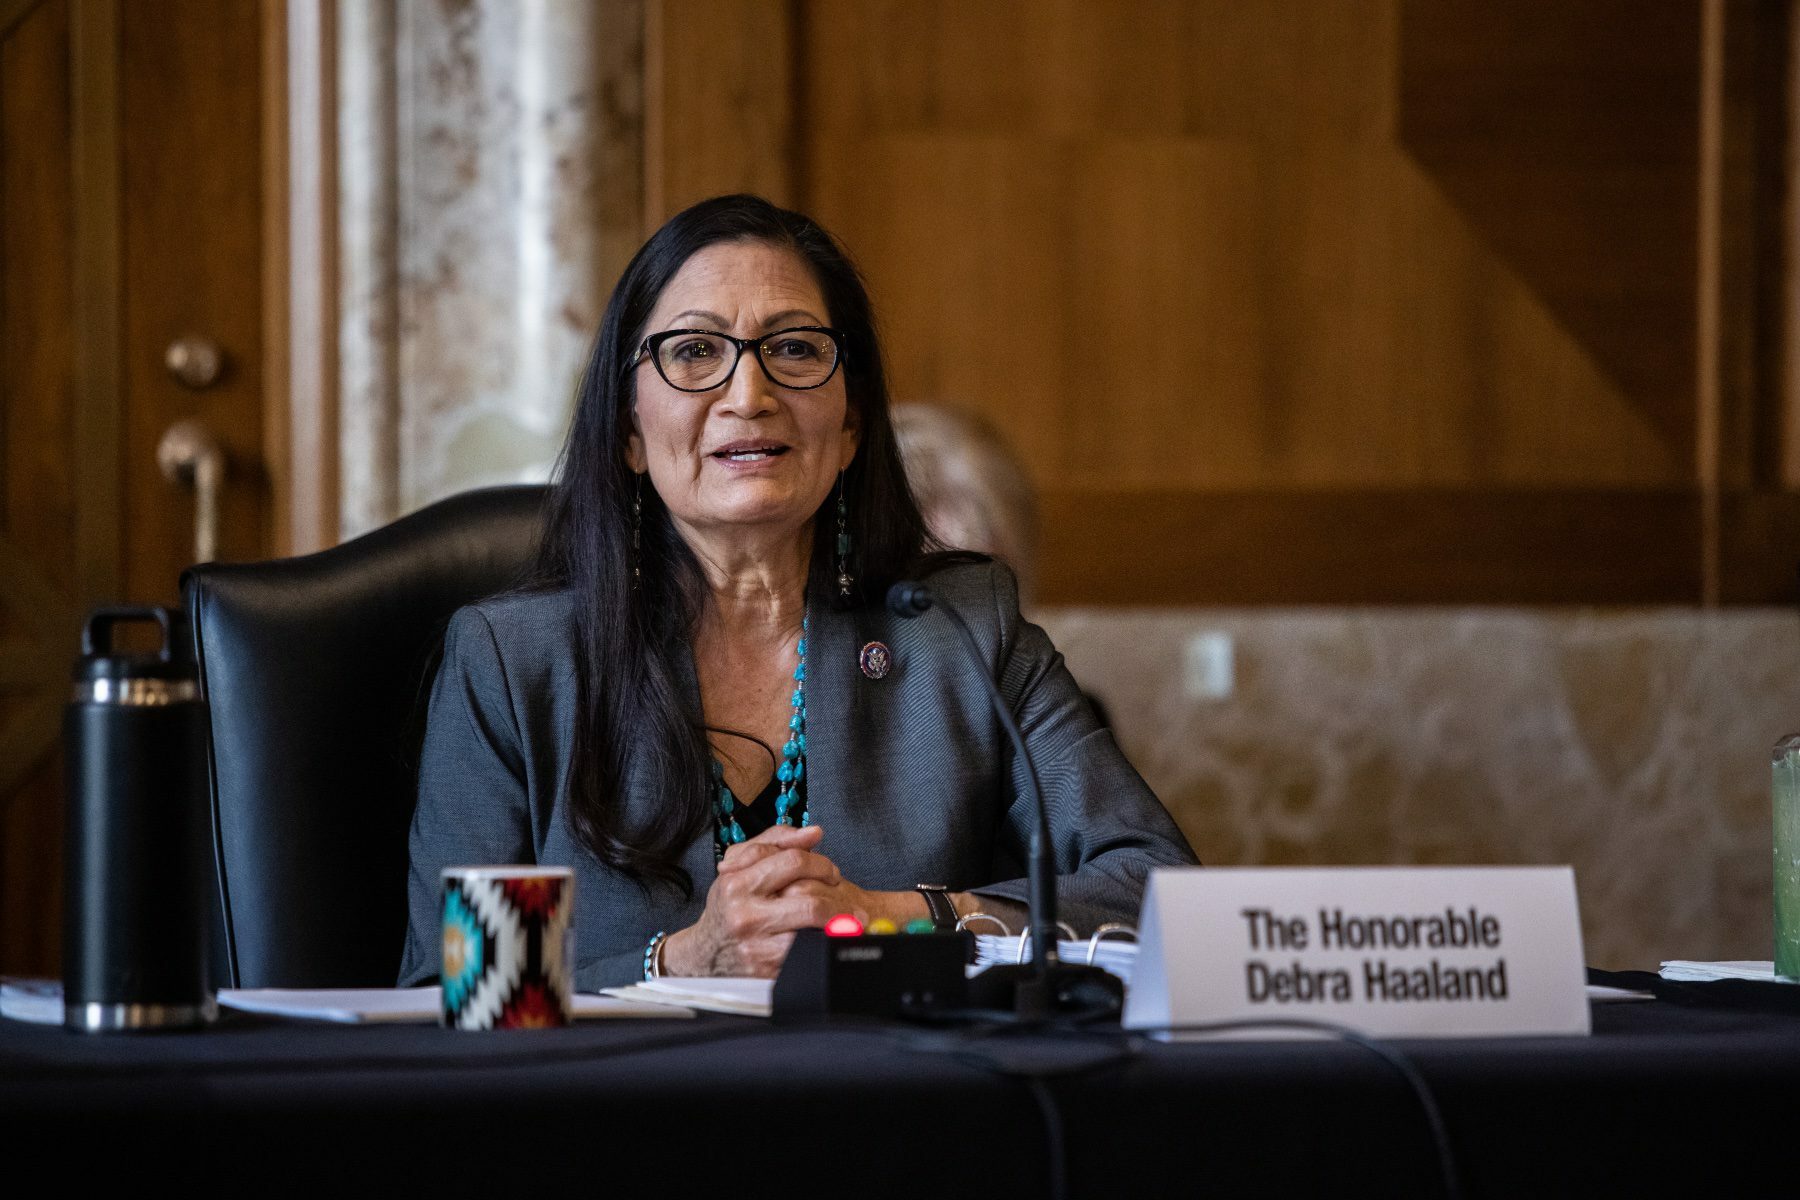 Deb Haaland sitting at a table speaking into a microphone.